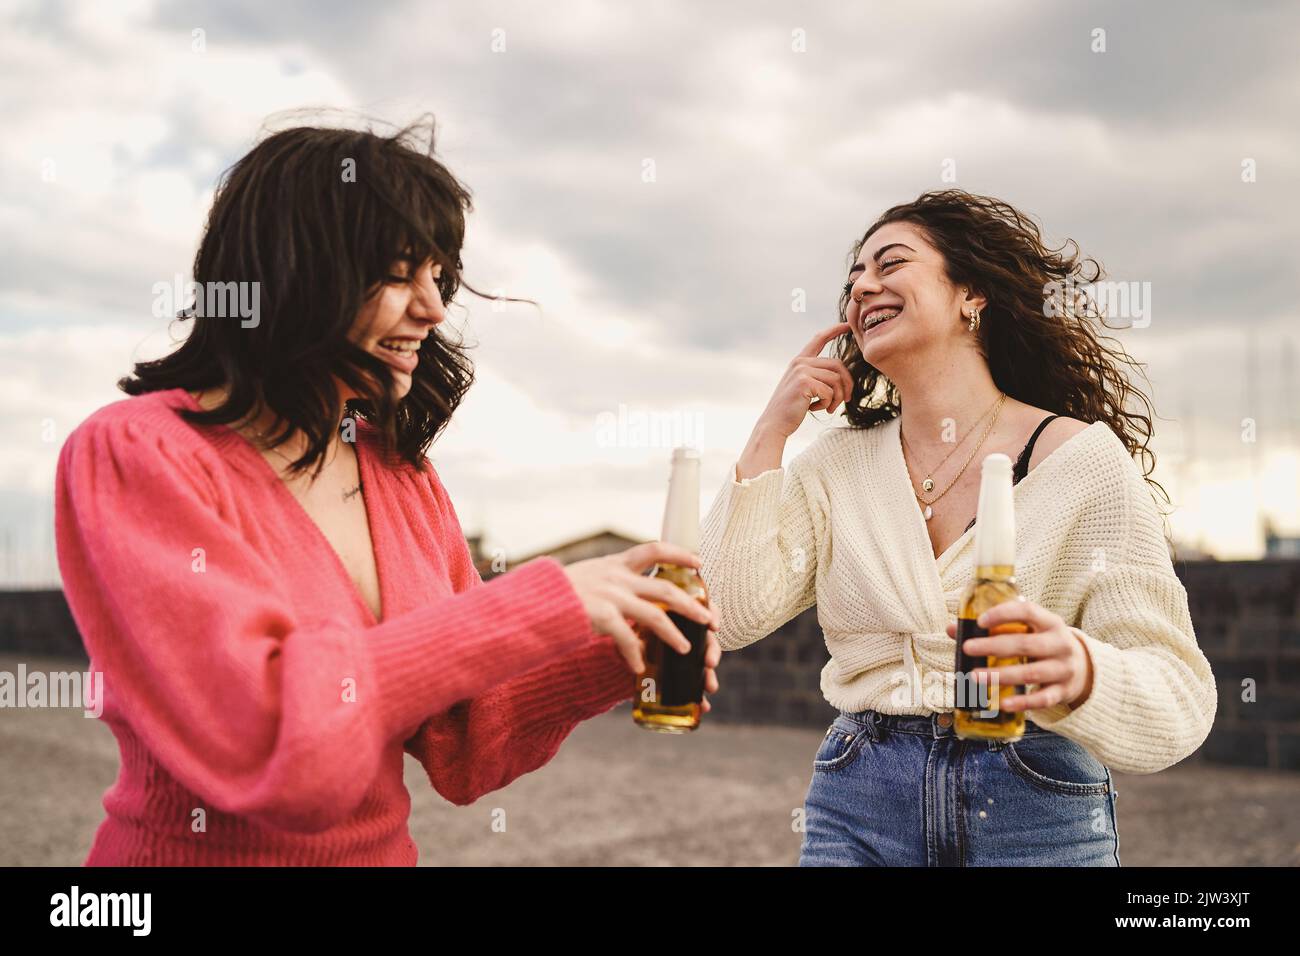 Two girlfriends laugh together with beers whose foam comes out of the bottle - young women drinking beers and having fun together outdoors - people li Stock Photo